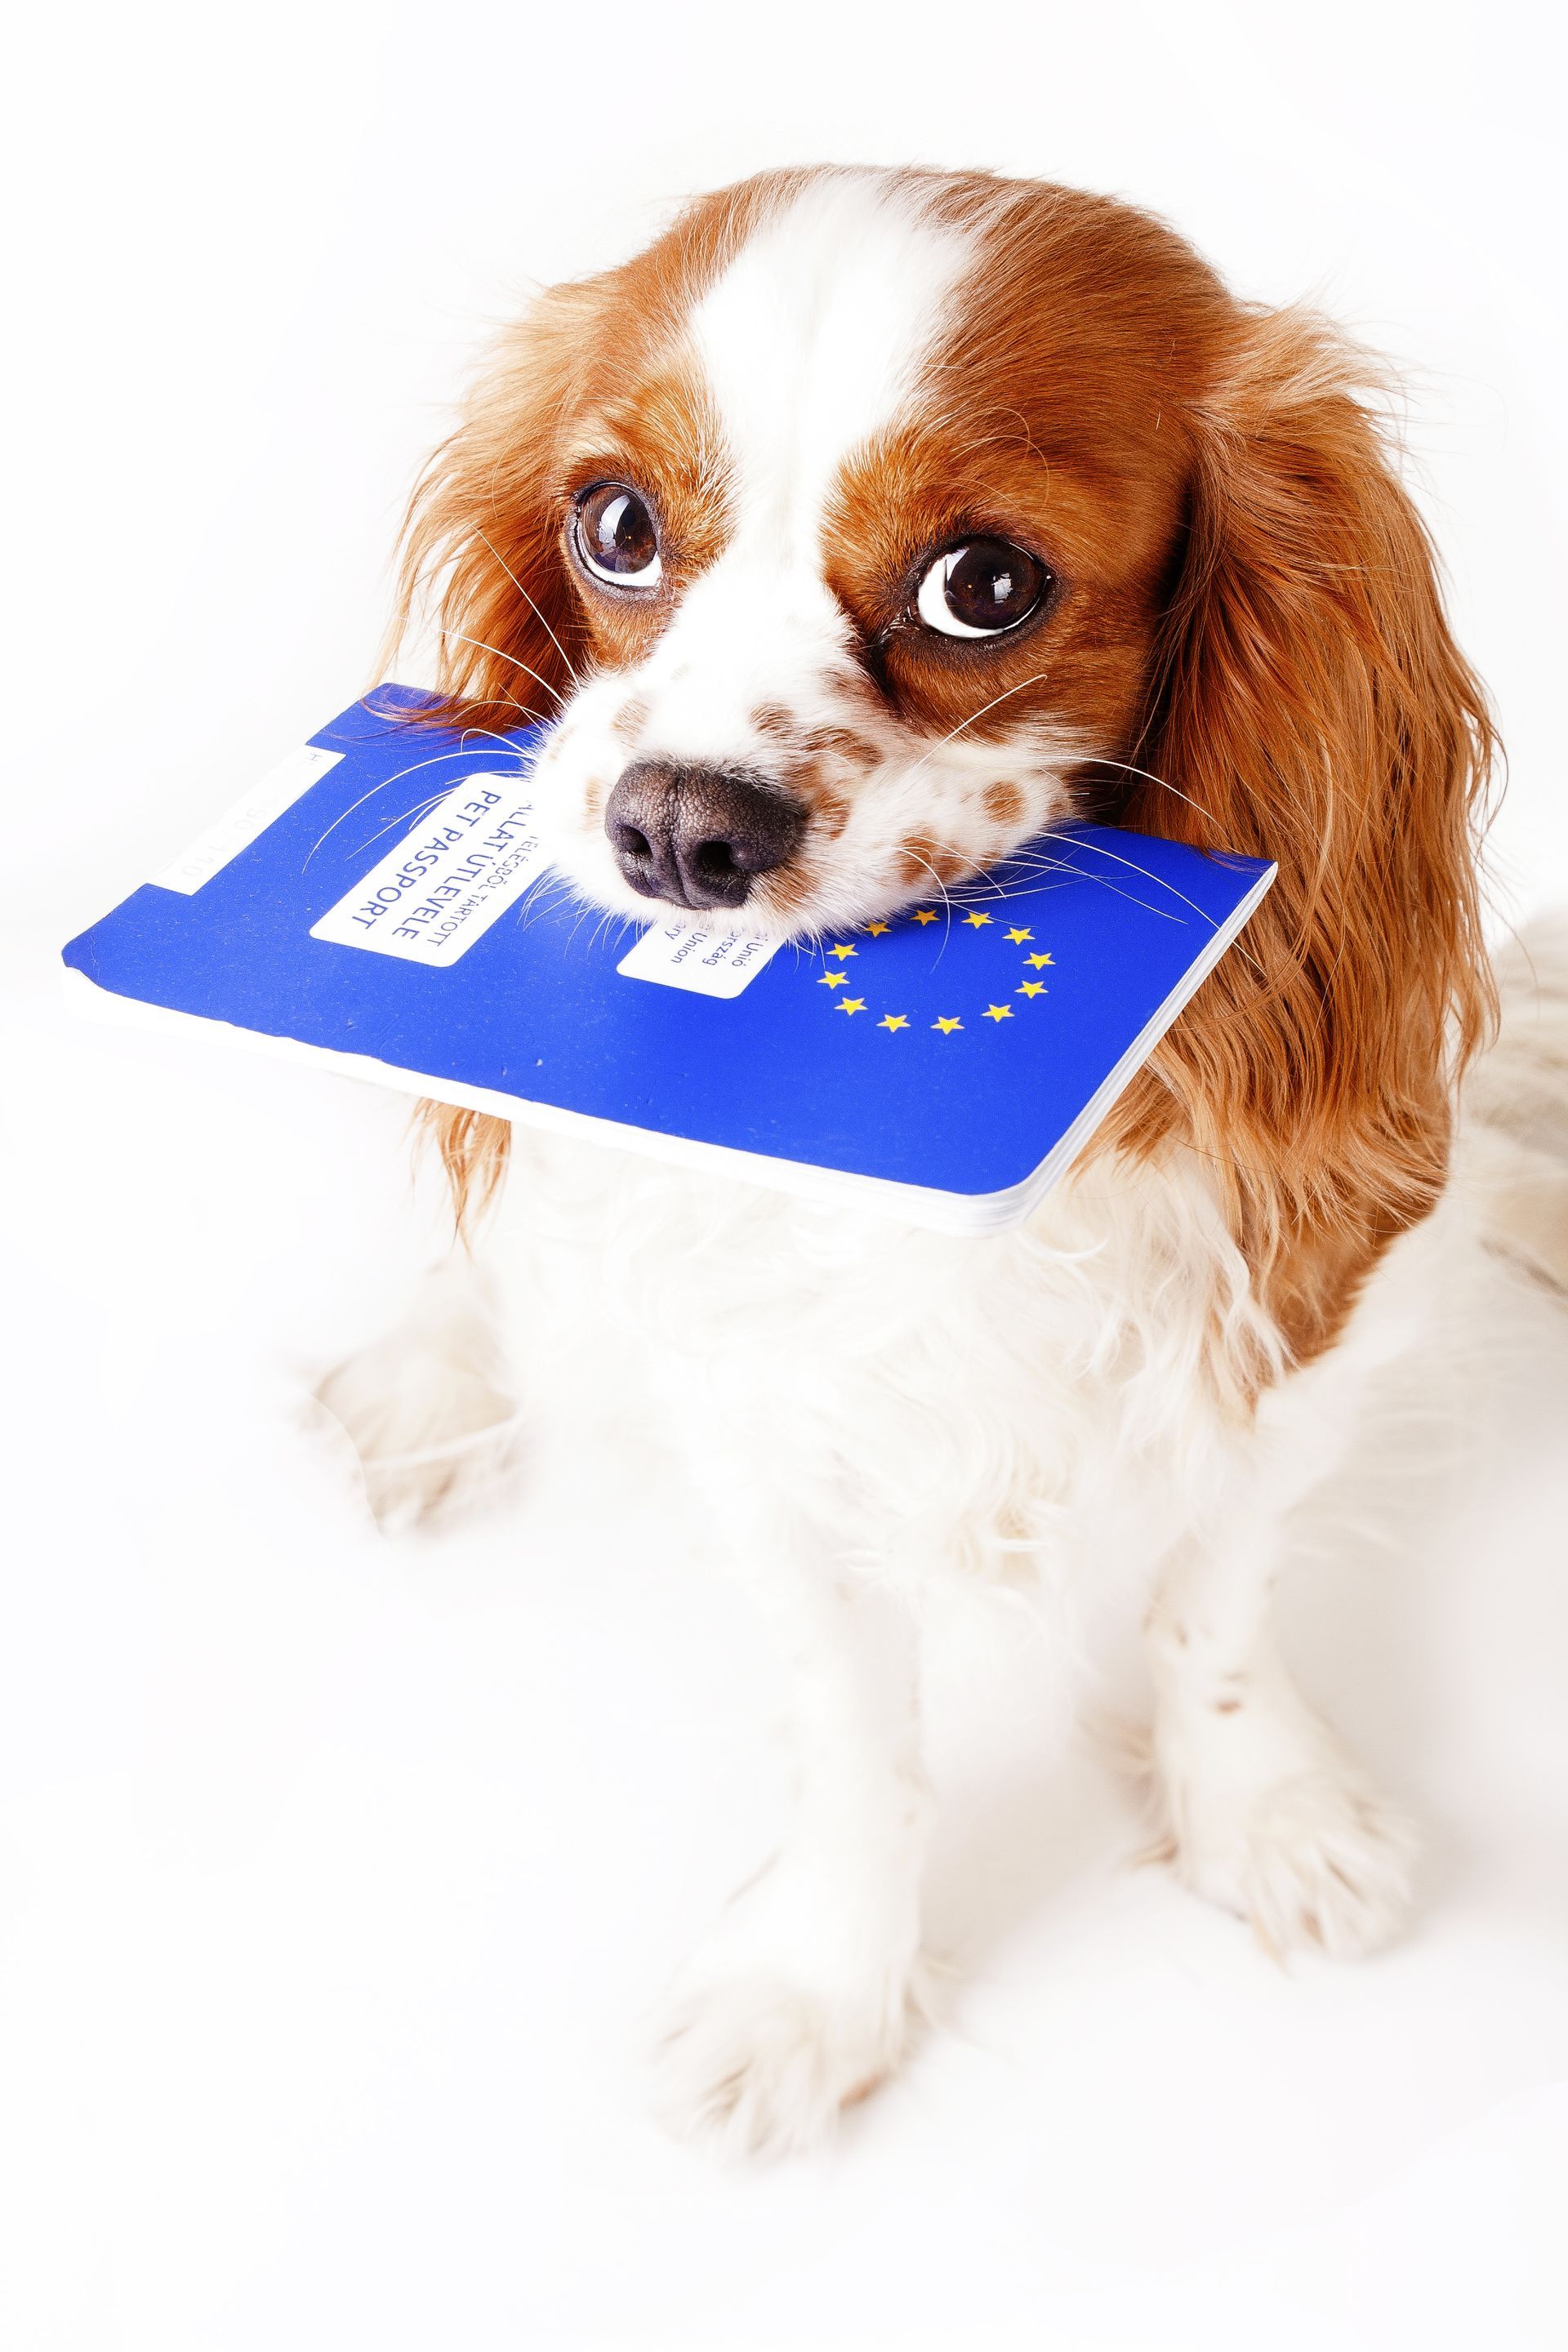 A brown and white dog is holding a blue card in its mouth.